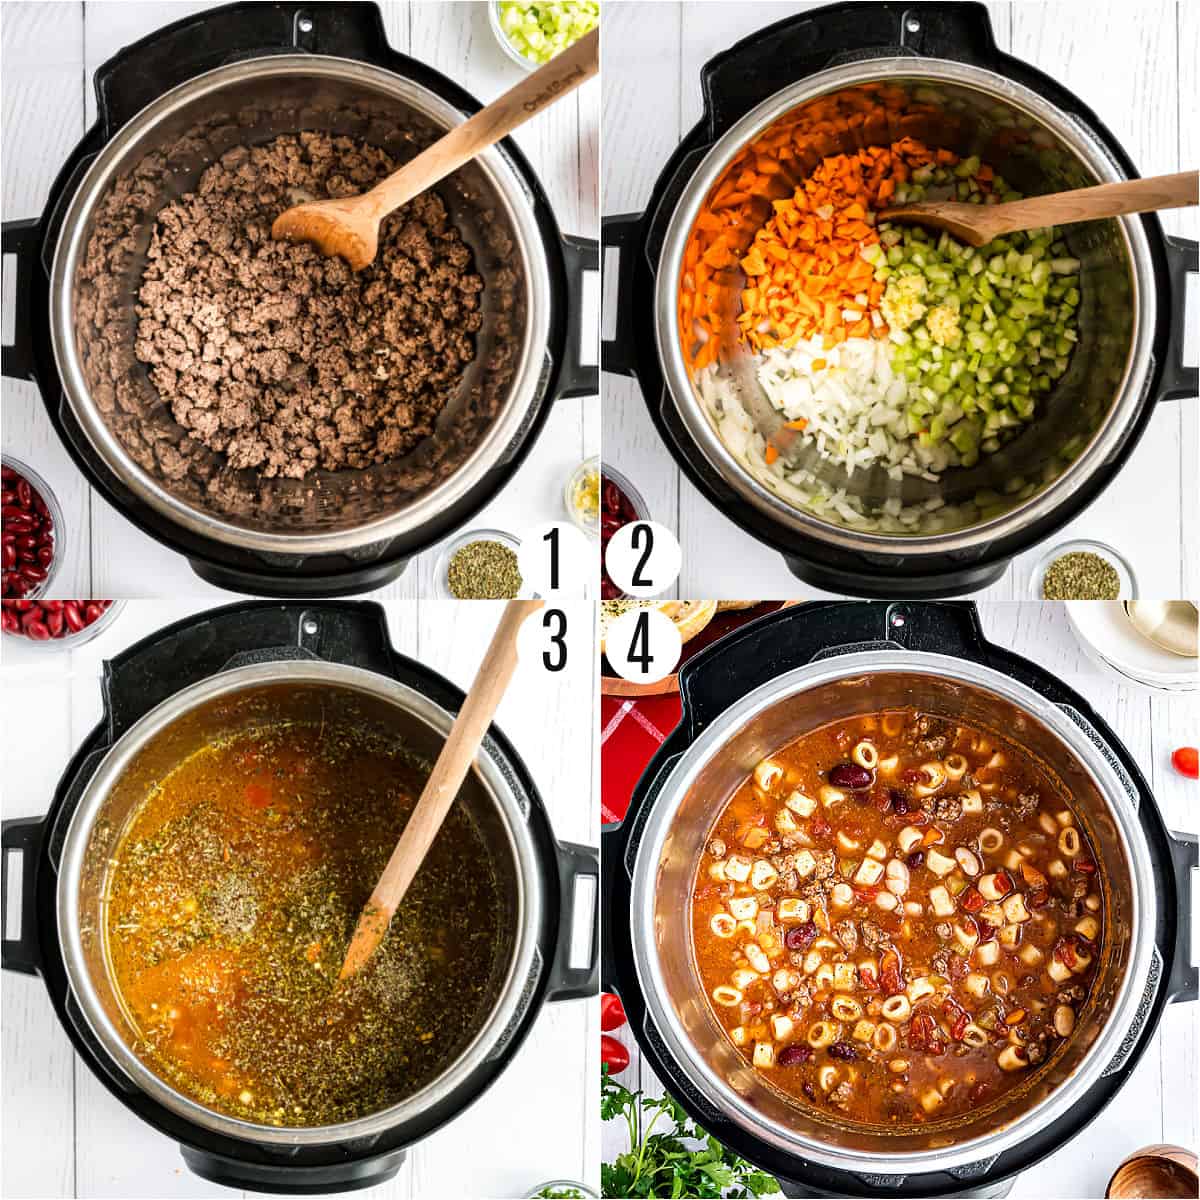 Step by step photos showing how to make Instant Pot pasta e fagioli soup.
